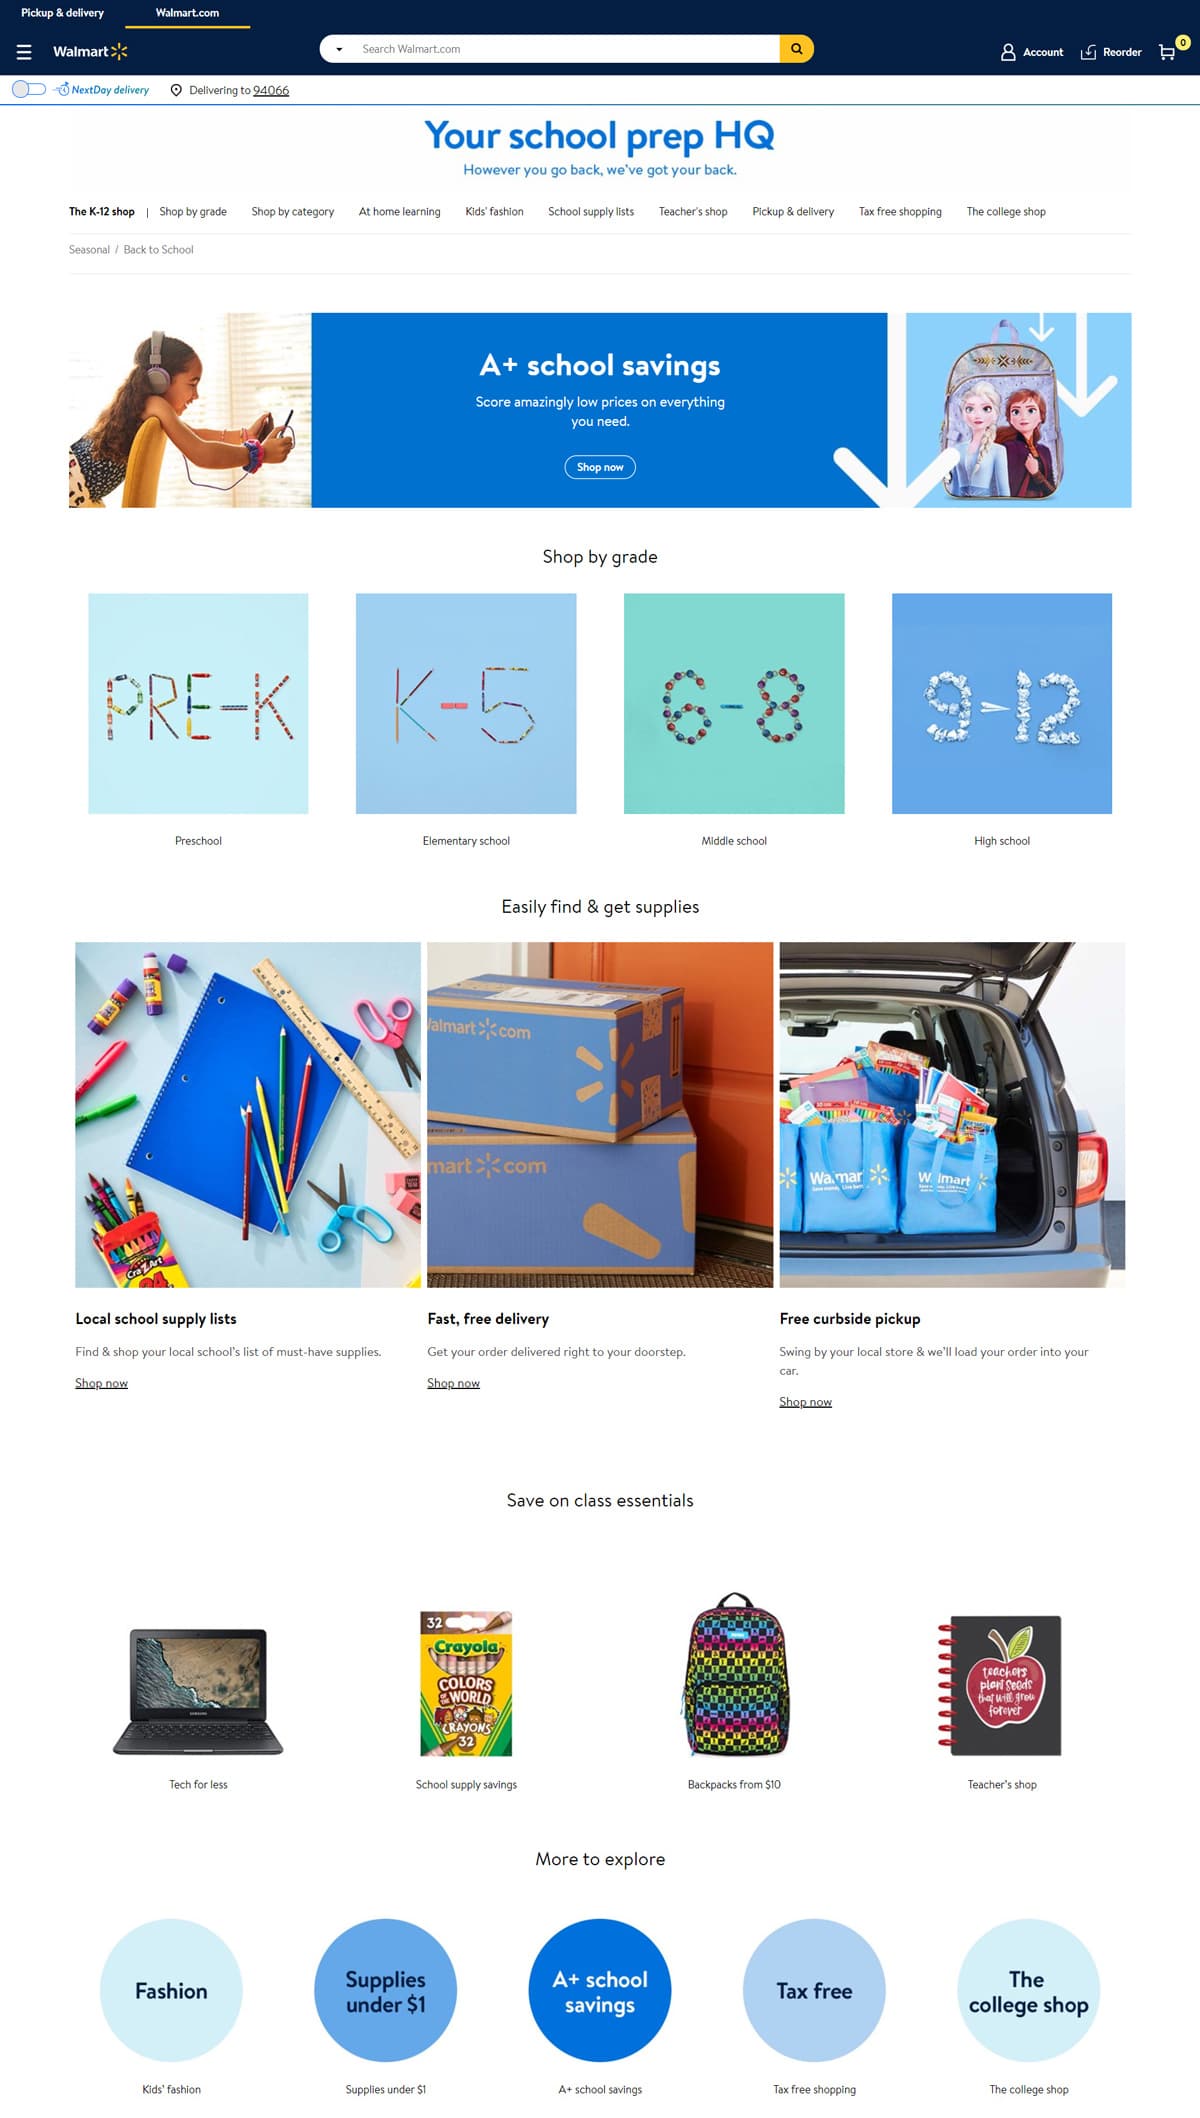 How Can Creative Retail Display Ideas Fuel Up Back-to-School Promo?